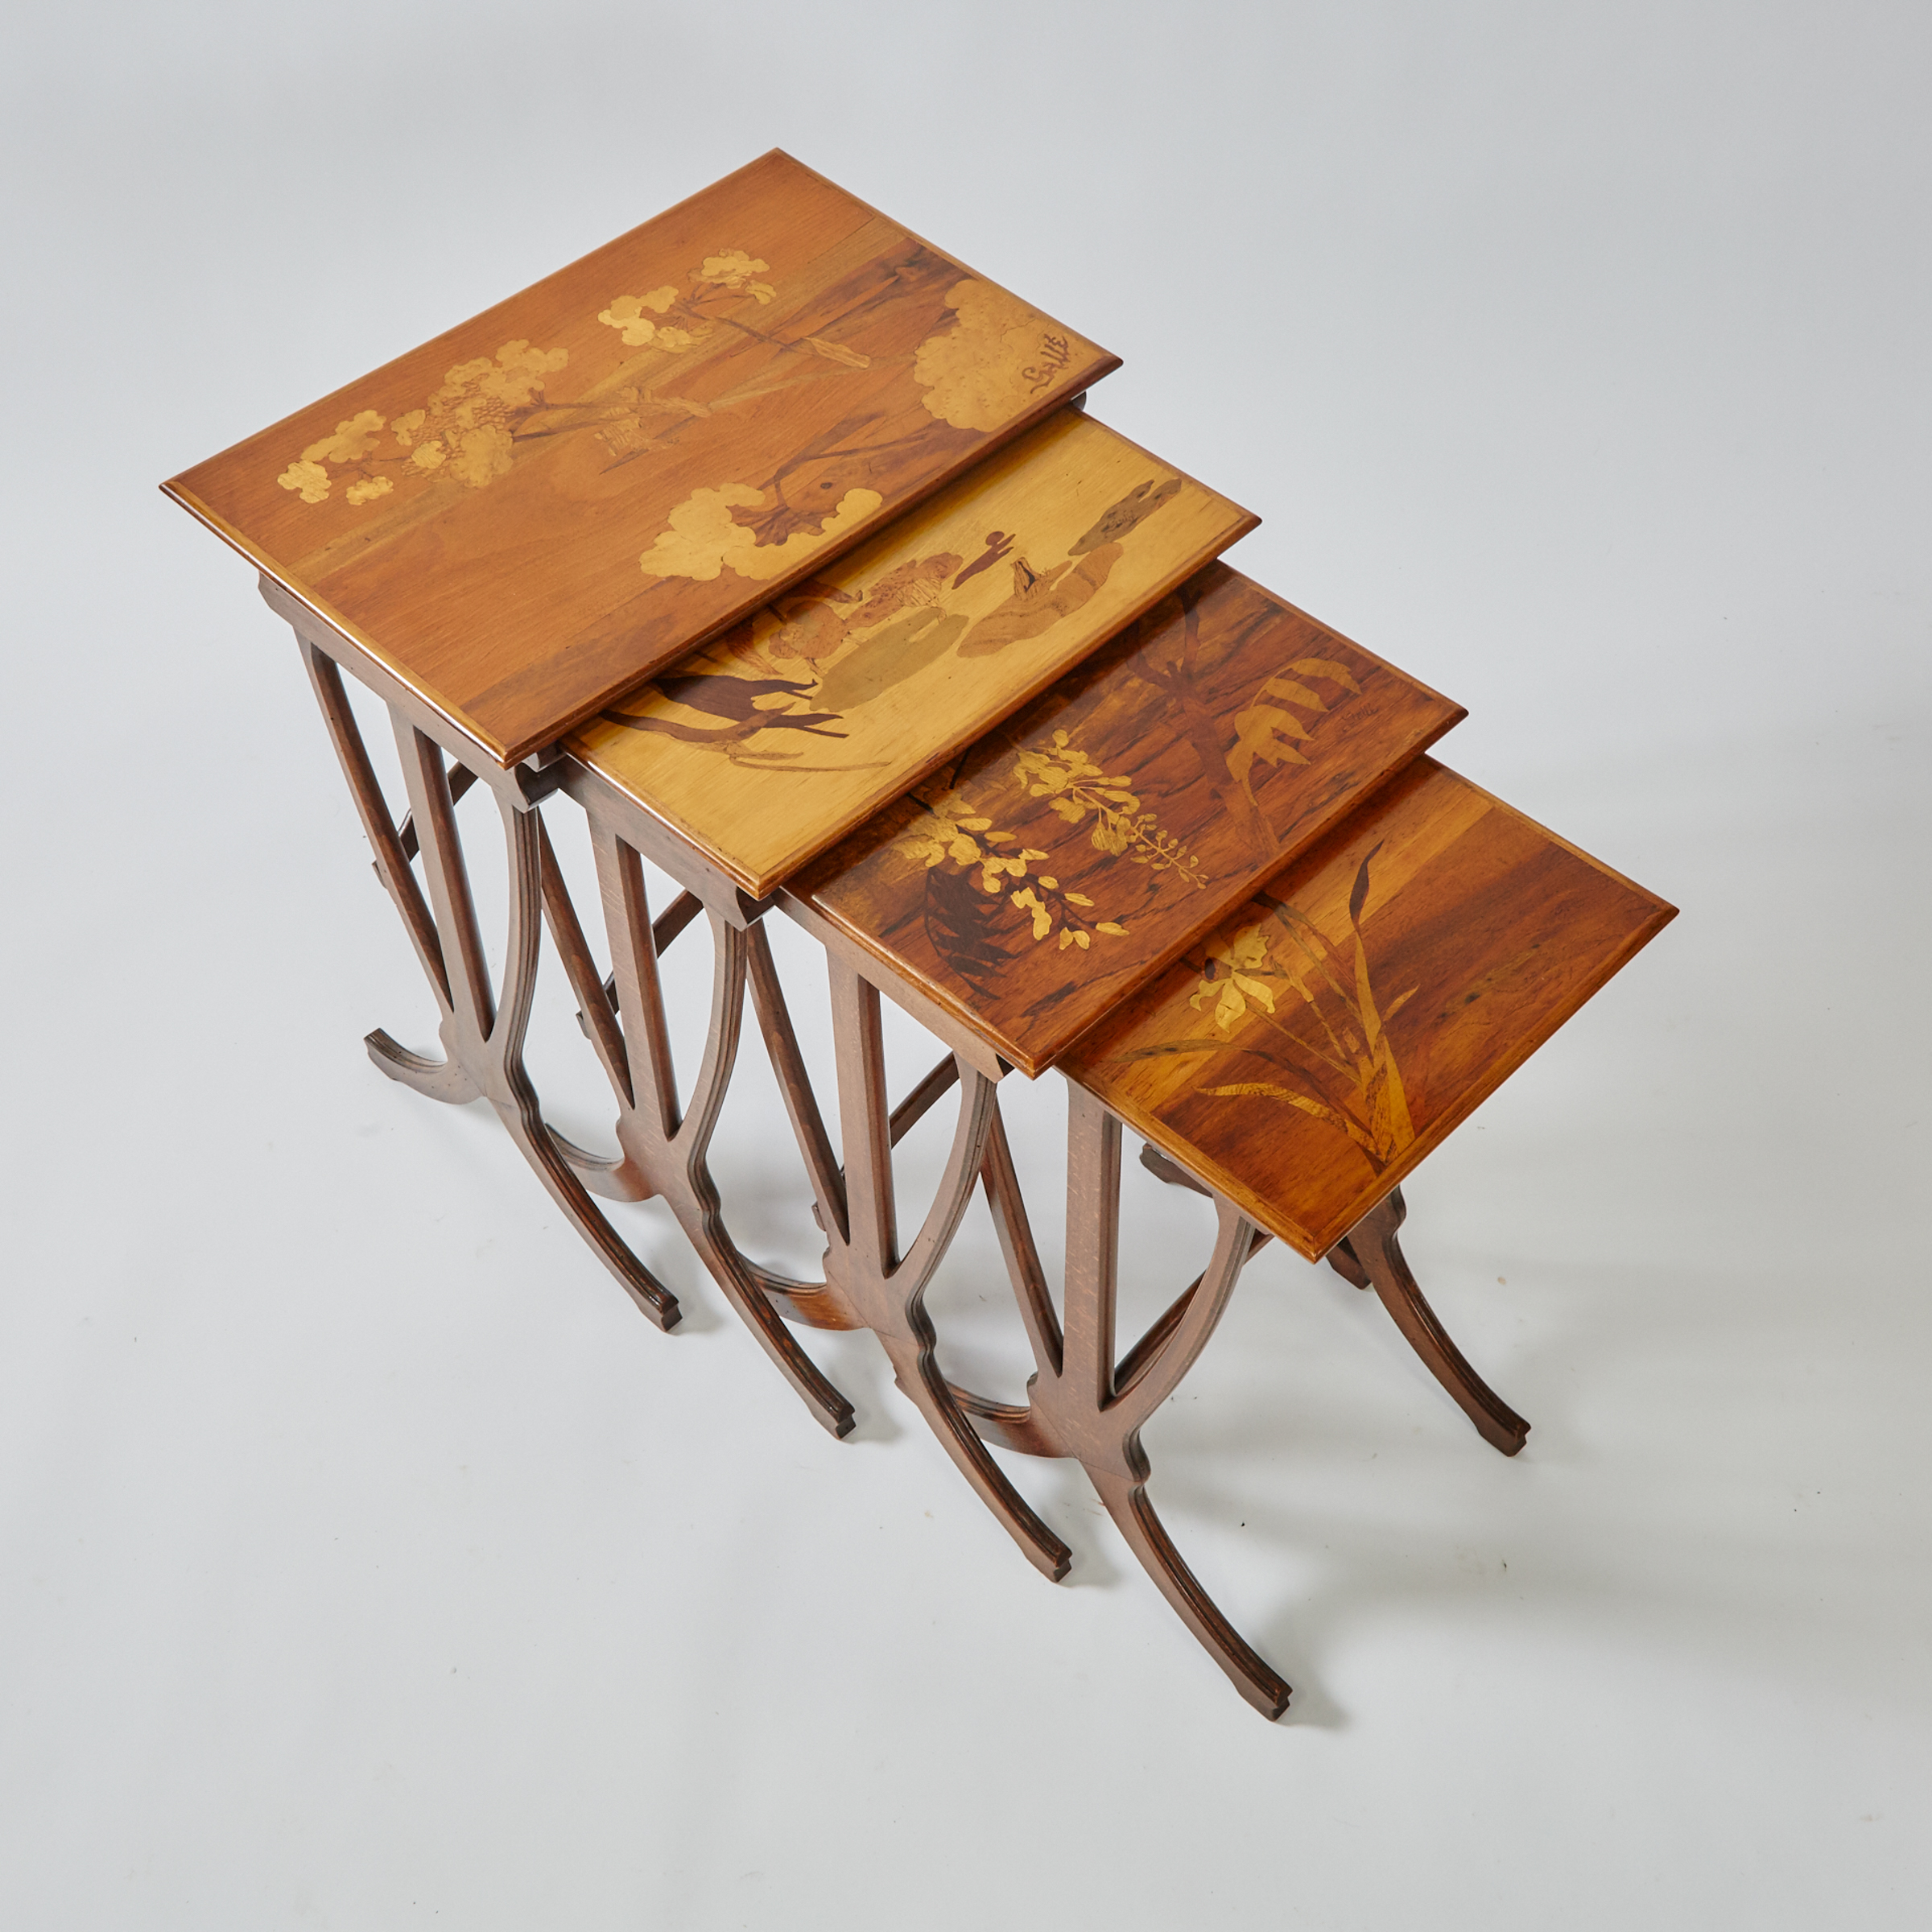 Set of Four Émile Gallé French Art Nouveau Mixed Wood Marquetry Inlaid Nesting Tables, 19th/early 20th century